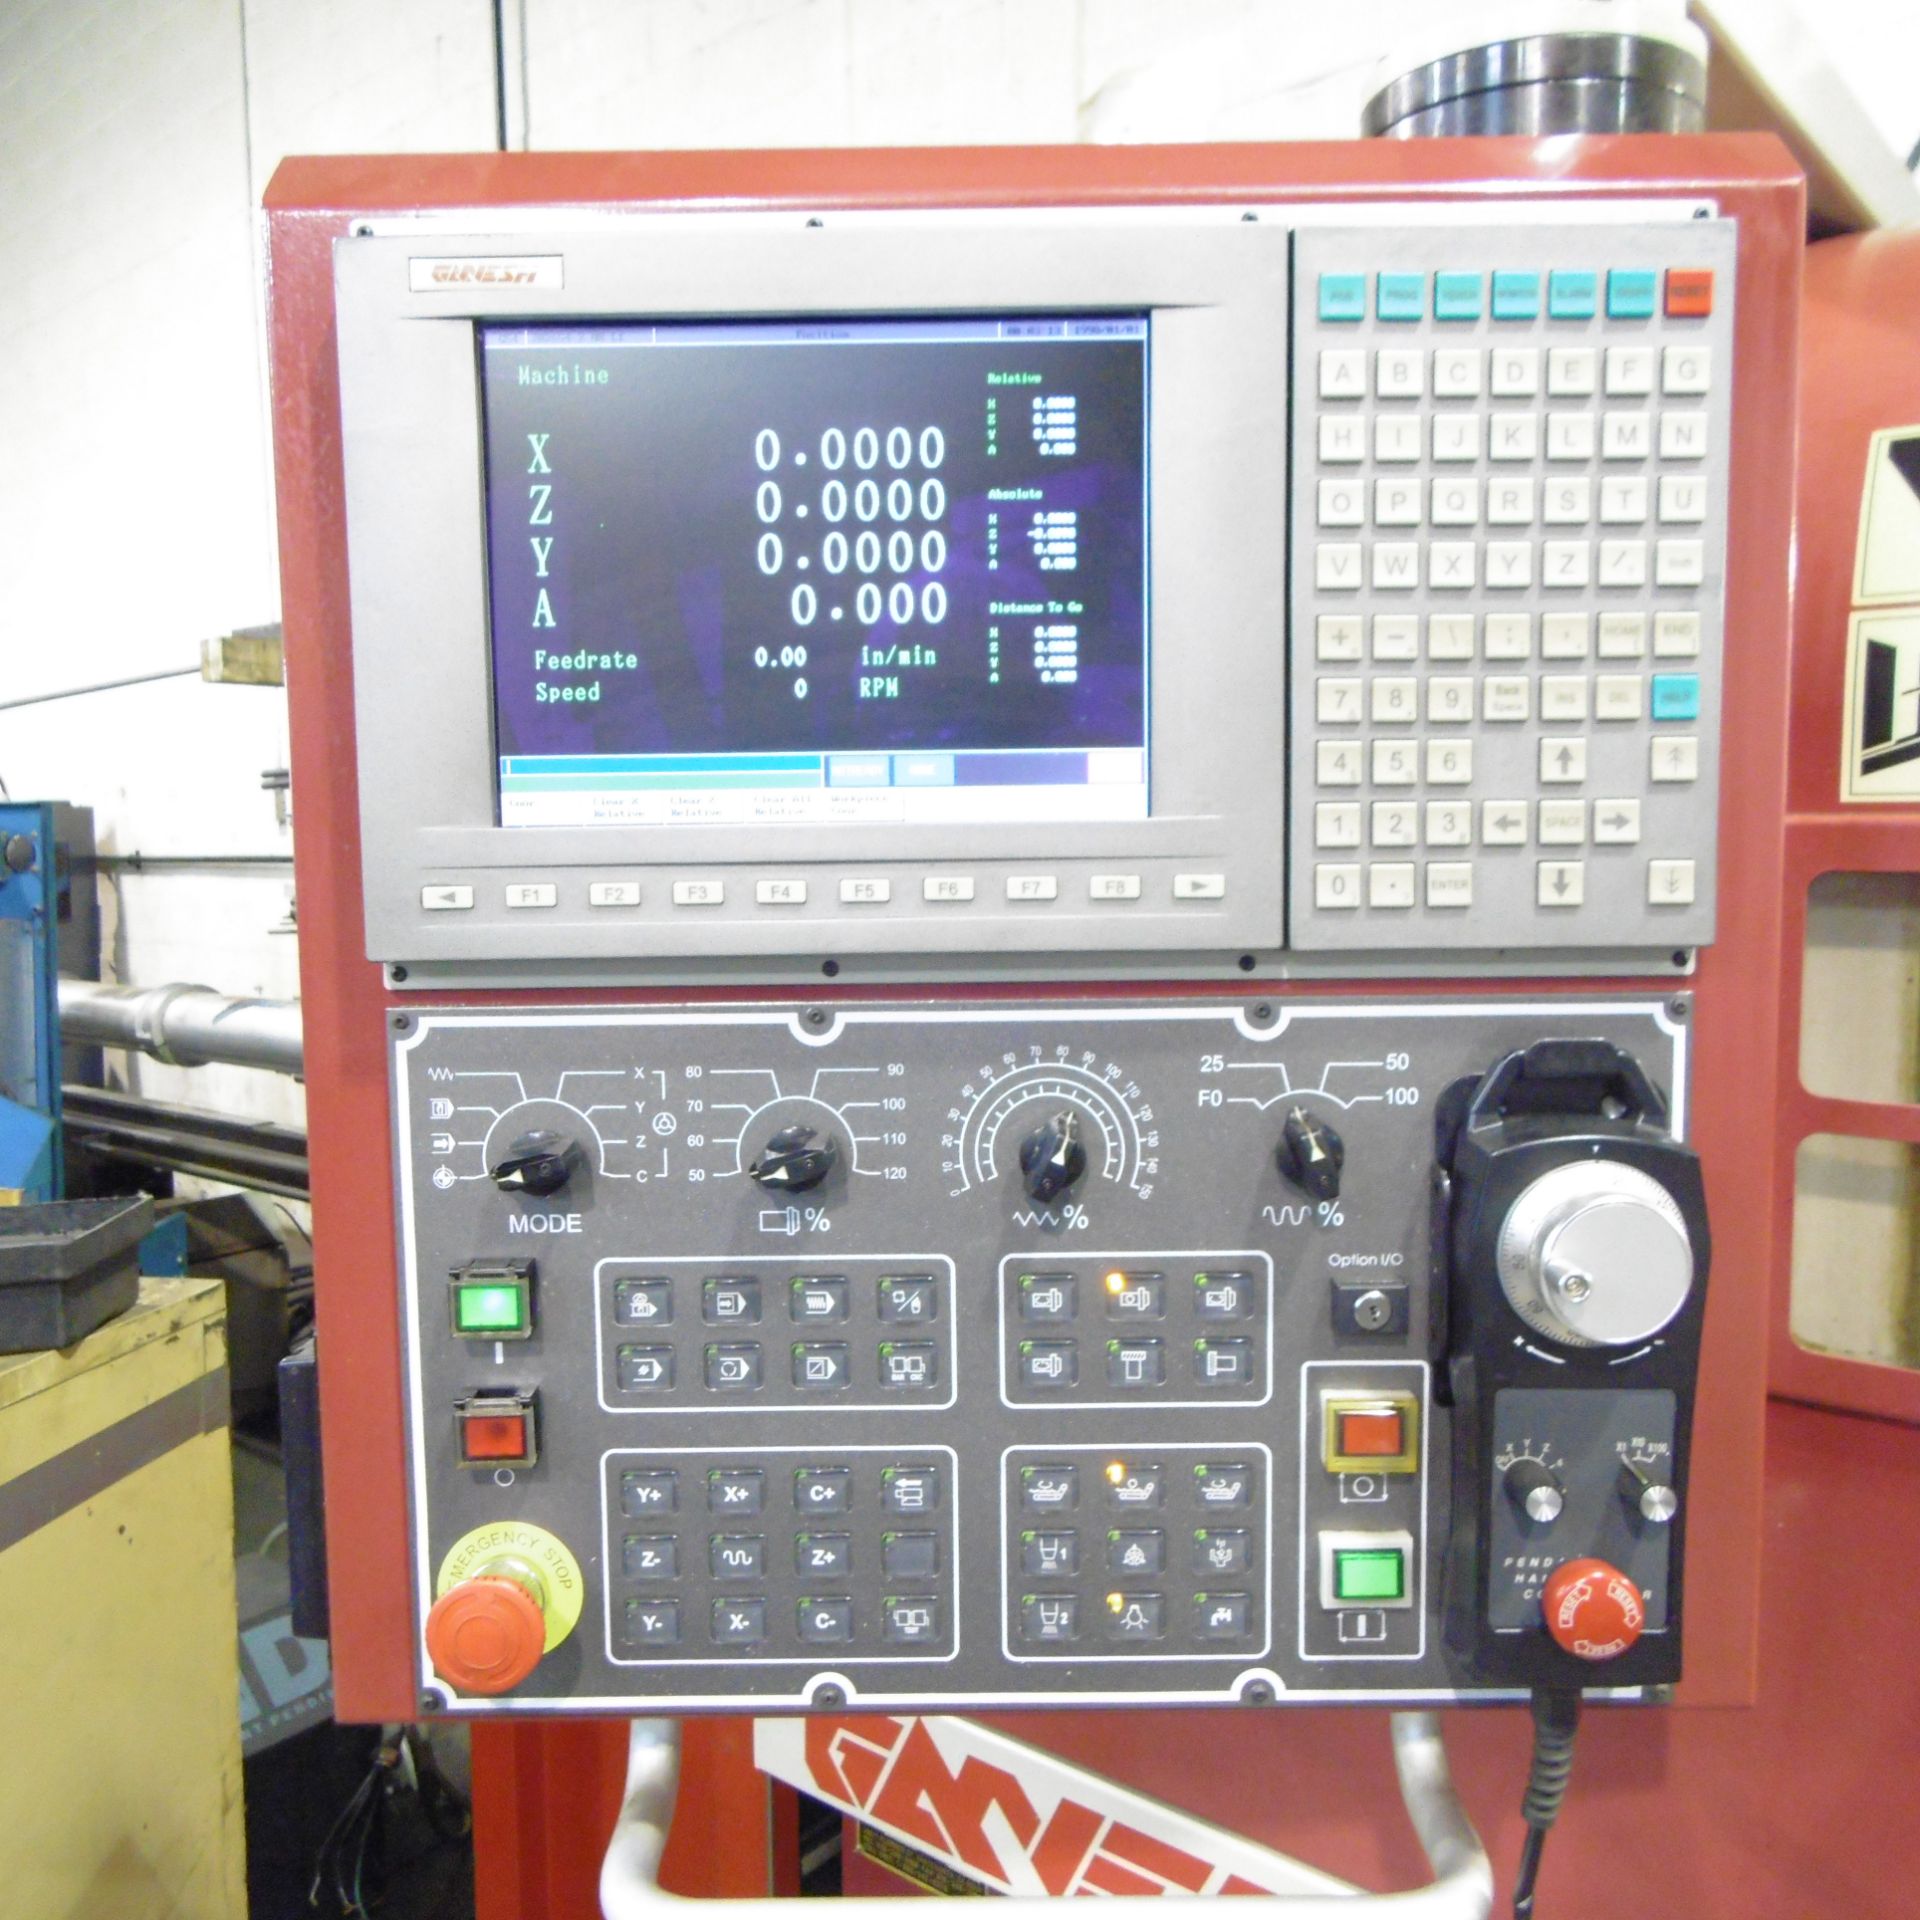 GANESH CYCLONE 25 SWISS TYPE CNC TURNING CENTER WITH SYNTECH 900 CNC CONTROL, TRAVELS X-7.5", Z-6. - Image 3 of 4